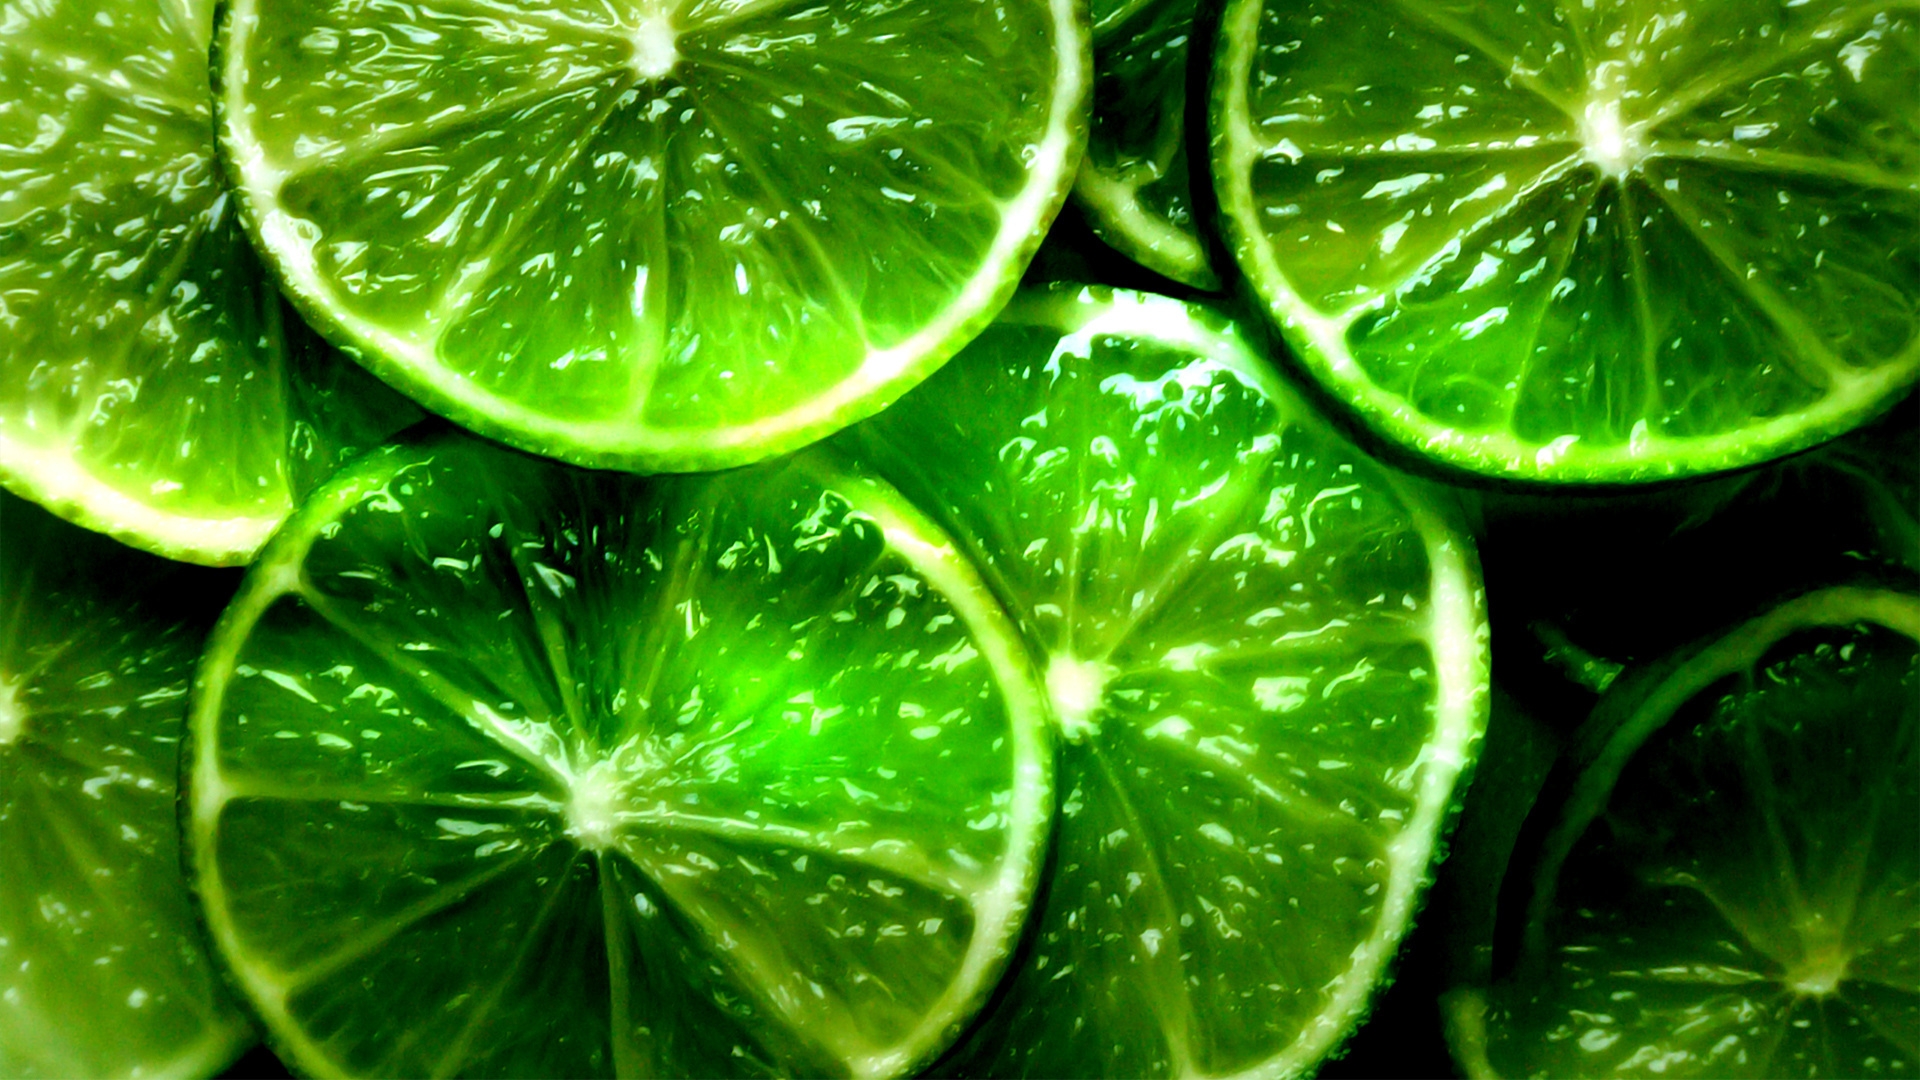 A close up of a pile of sliced limes. - Lime green